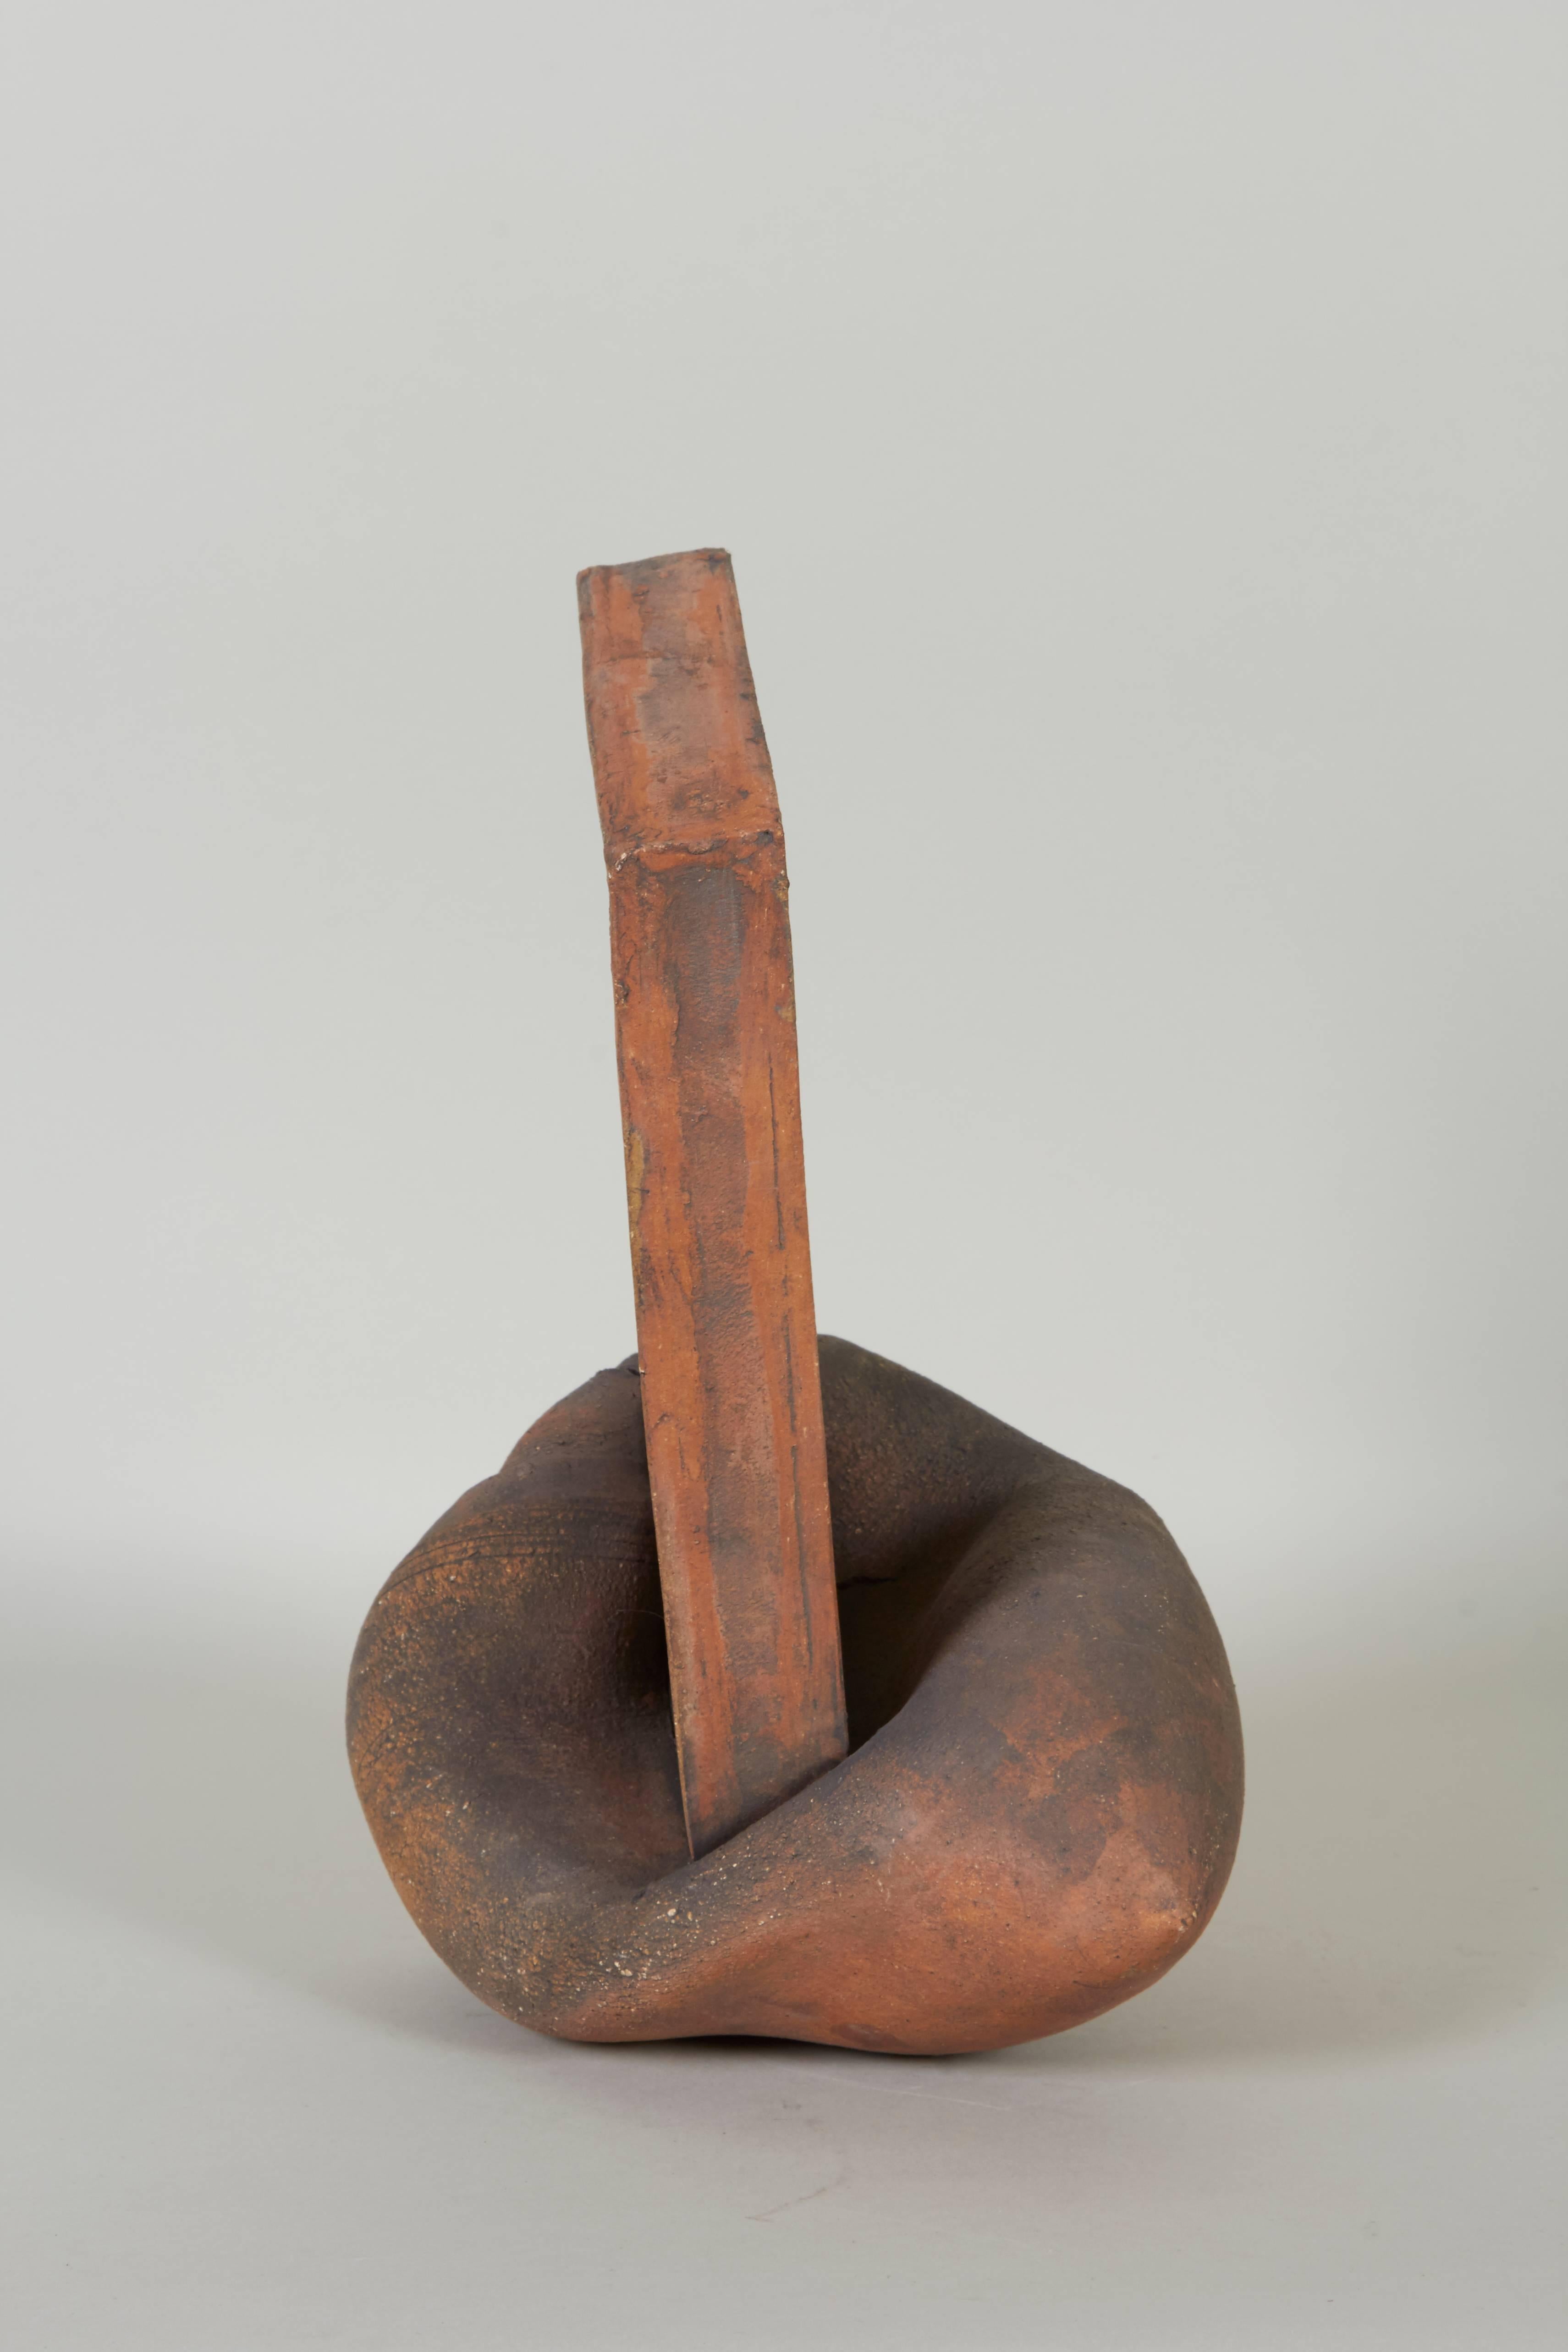 An arrangement of abstract modern fired clay constructions by Irene Wheeler (American, 1917-2003), produced circa 1970s-1980s, described as 'Hard/Soft', so-called for their contrasting linear and organic forms. Excellent condition, wear consistent